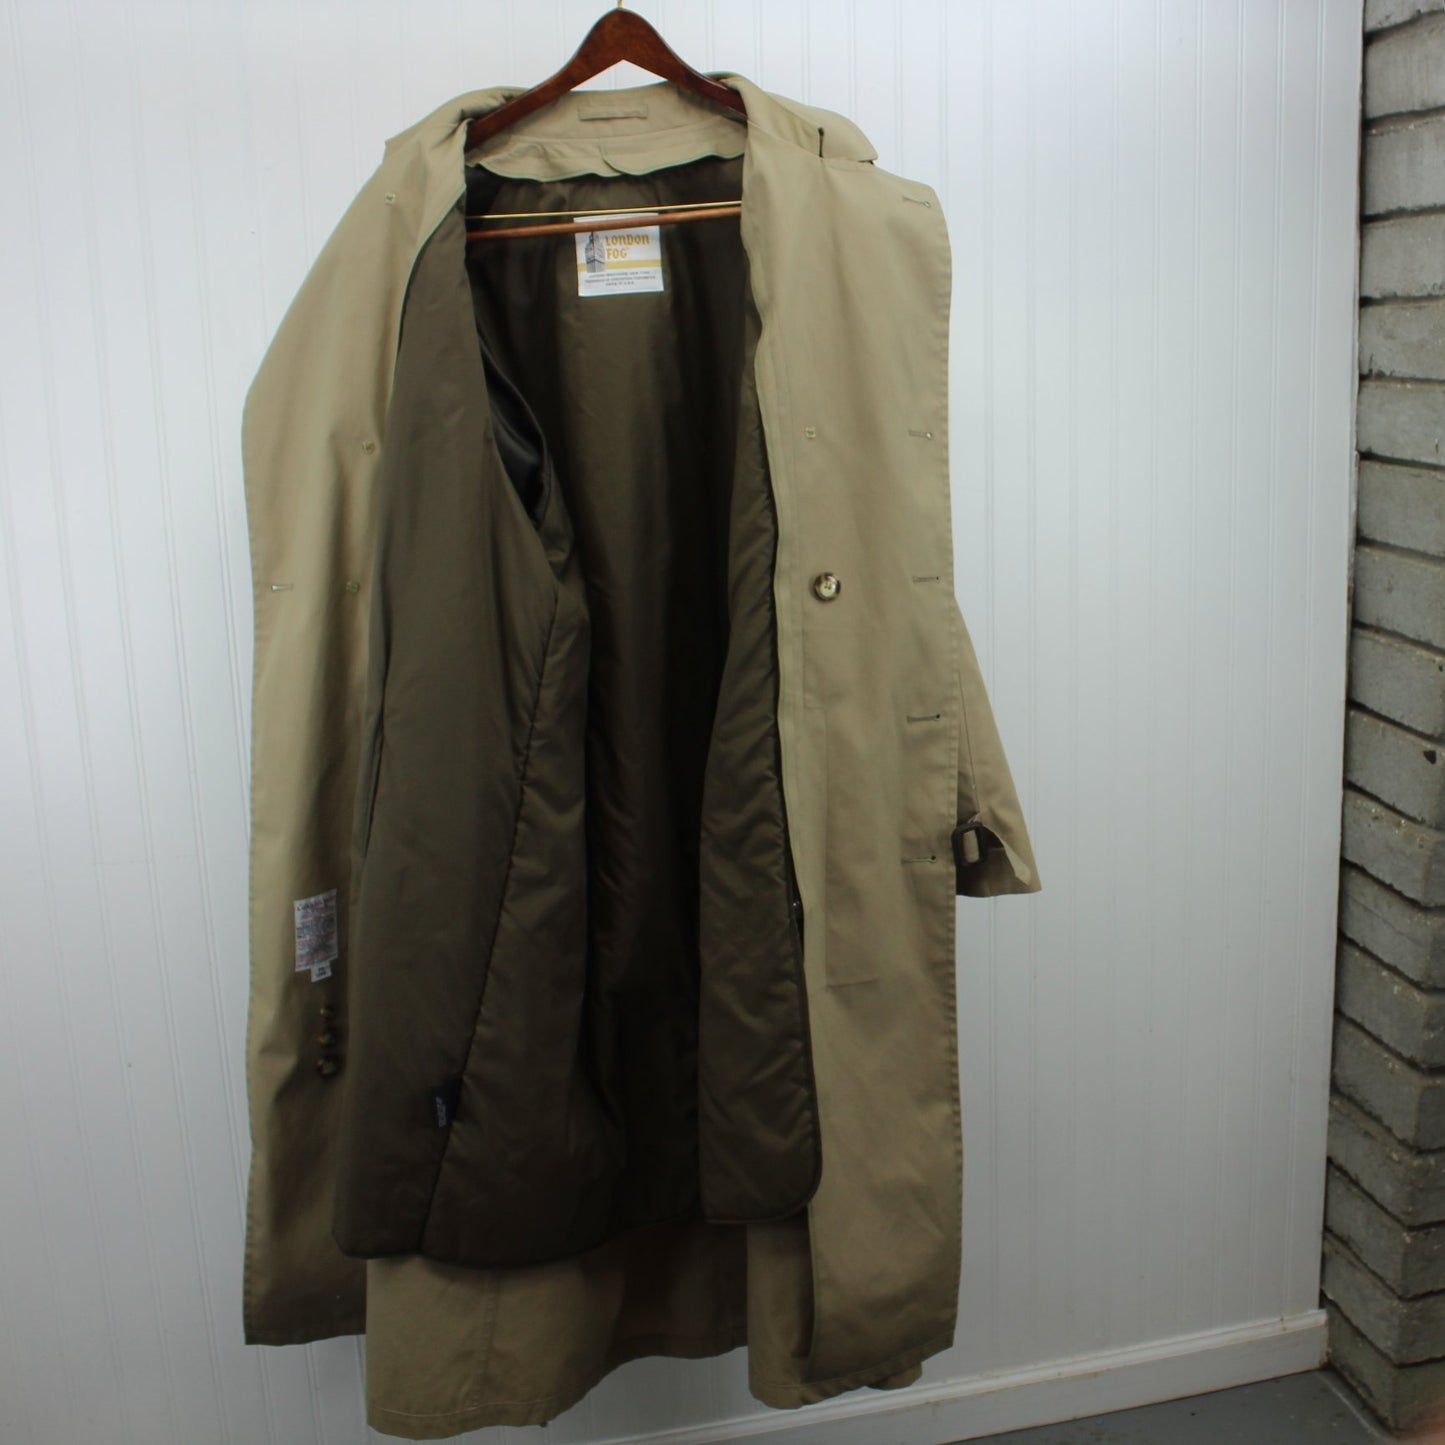 London Fog Trench Coat Men's 46L Dbl Breast Removable Thinsulate Lining inside lining view